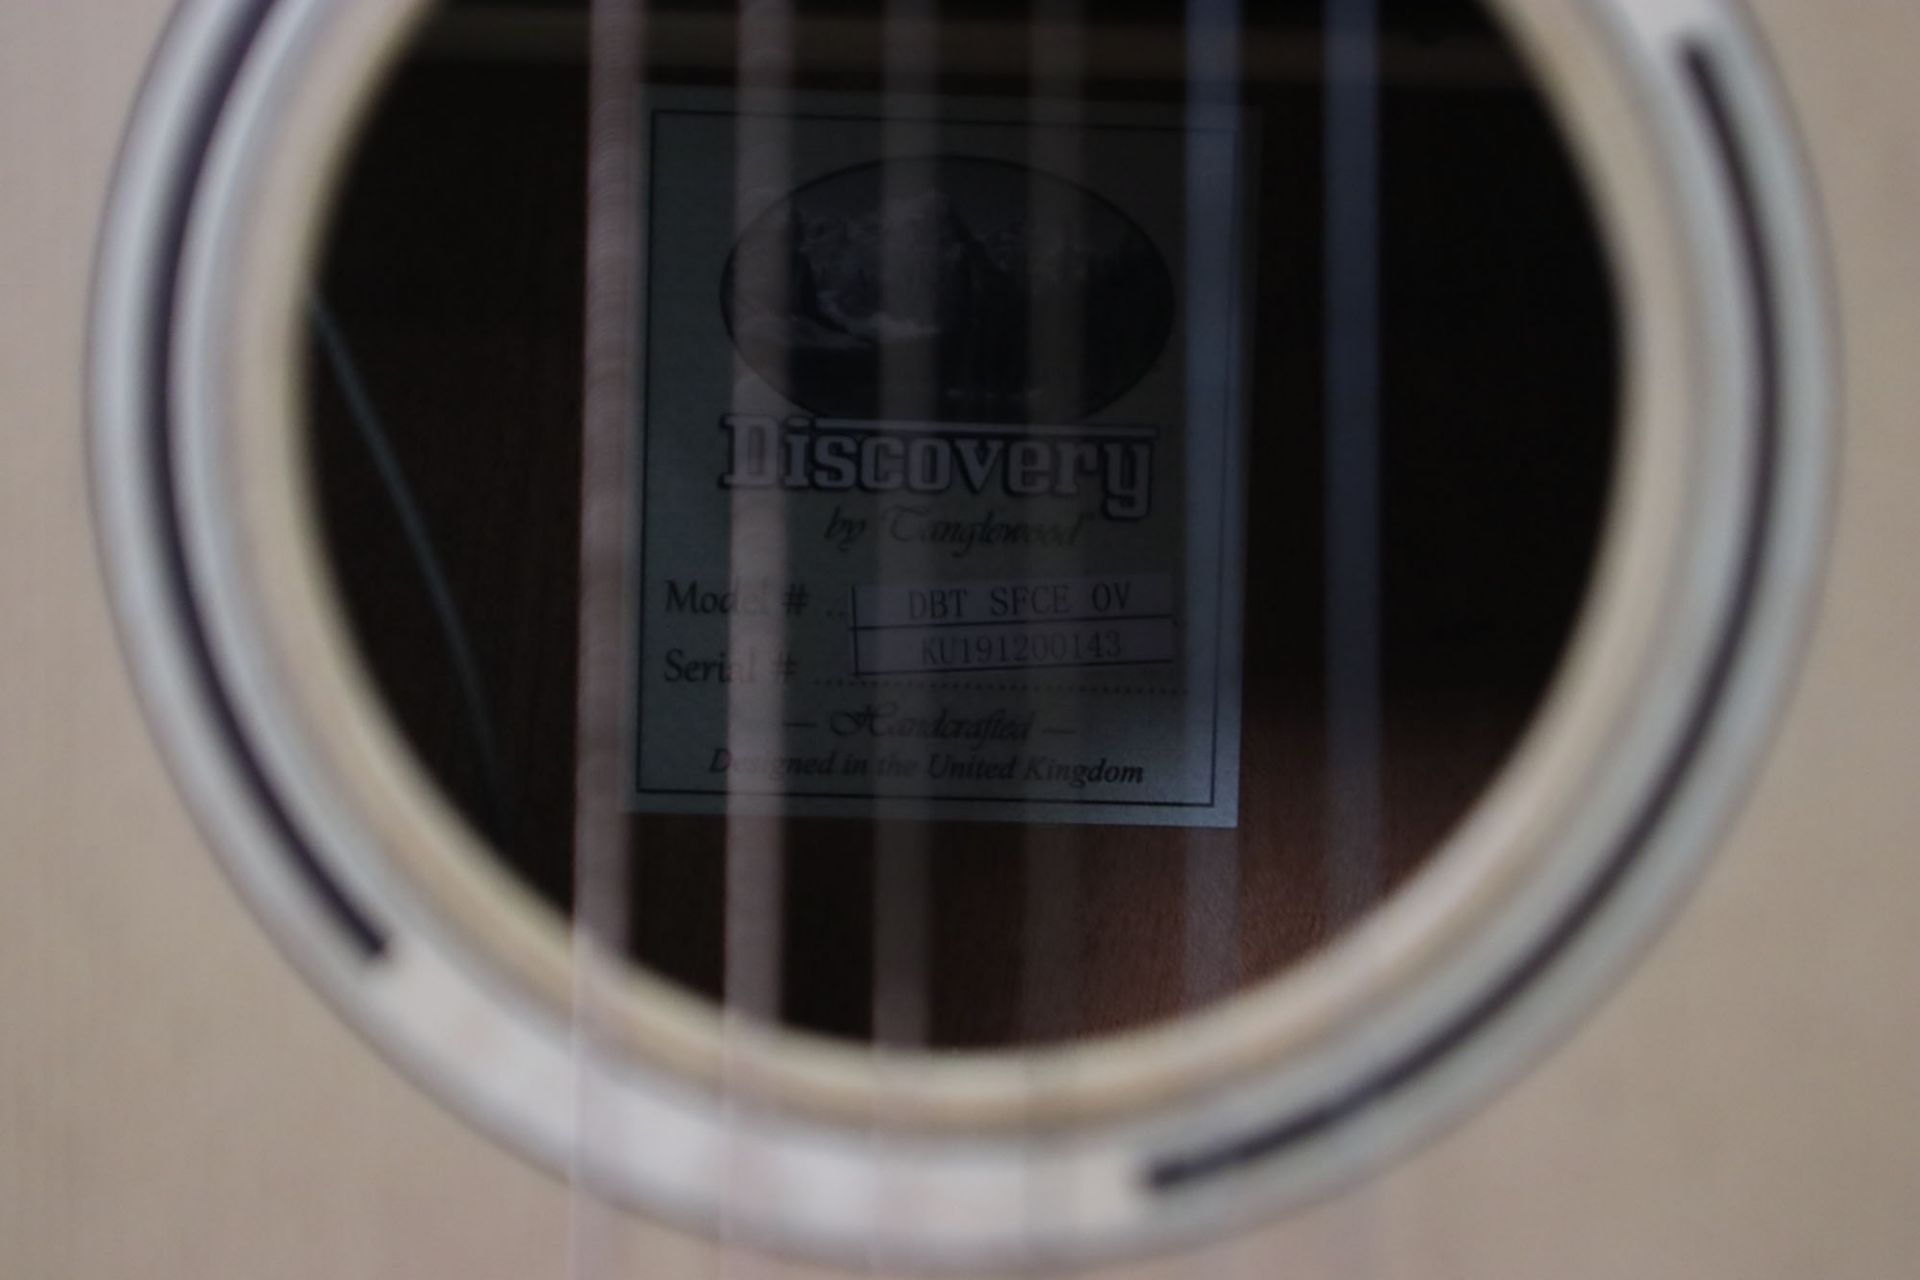 Discovery 6 string acoustic guitar - Image 2 of 3